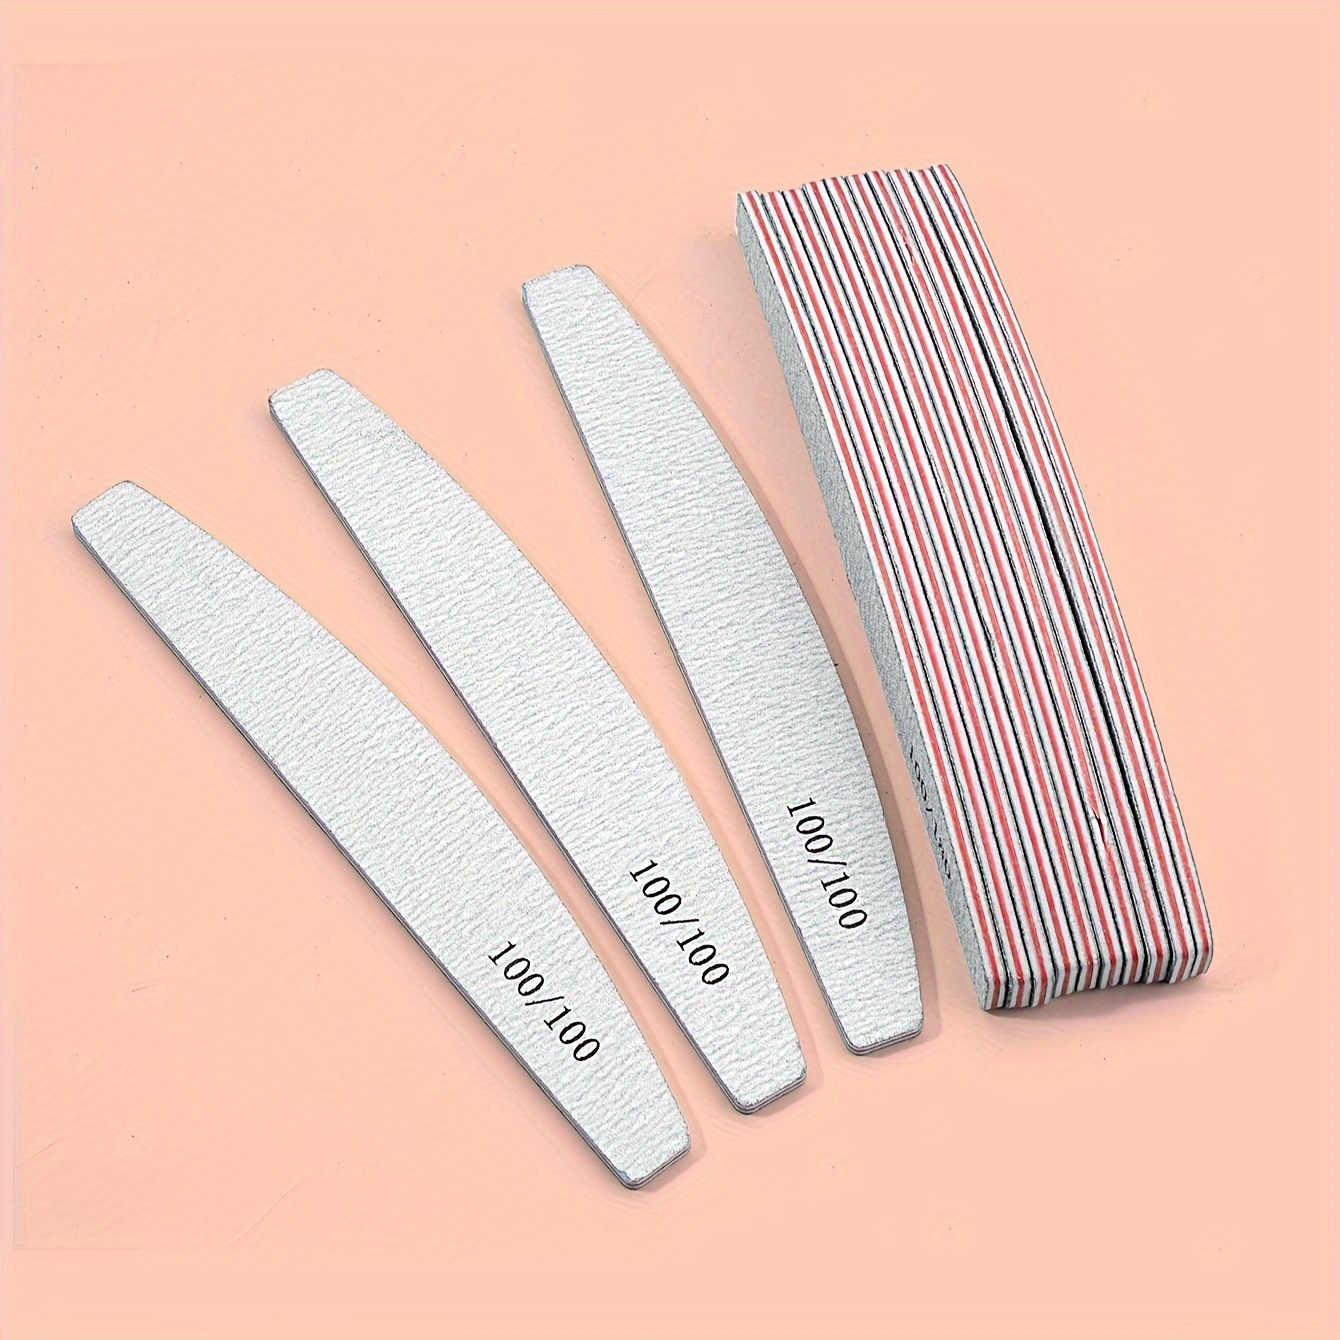 

25pcs Half Moon Shaped 80 100 180 Grit Nail Files Double Sided Emery Board Washable Emery Boards Reusable Nail Buffers Manicure Tools For Natural Nails Acrylic Nails Home And Salon Use